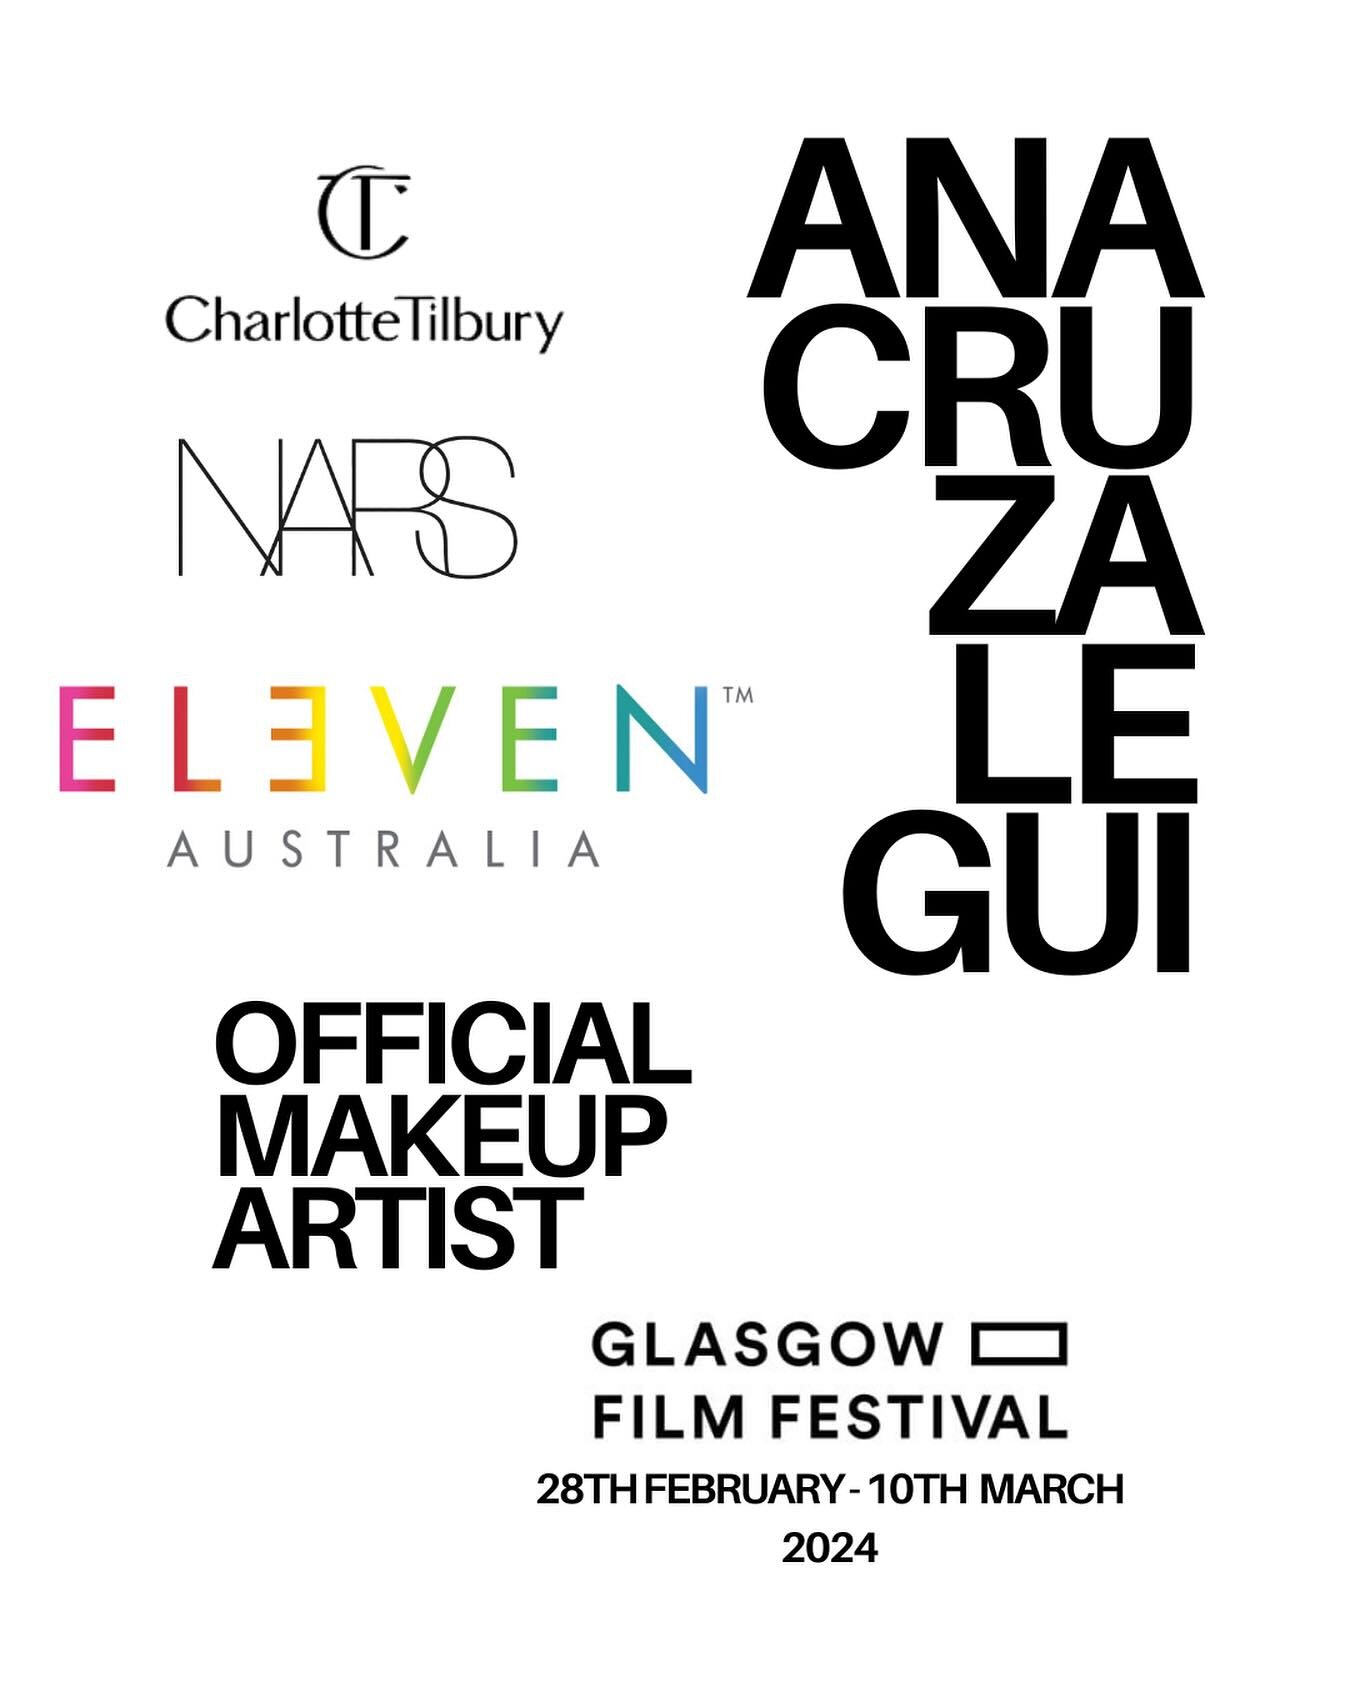 Excited for another year with the wonderful people of The Glasgow Film Festival and wonderful artist support from Nars, Eleven Australia &amp; Charlotte Tilbury 💋💄💋 🎬🎬🎬 #anacruzalegui #anacruzmakeup